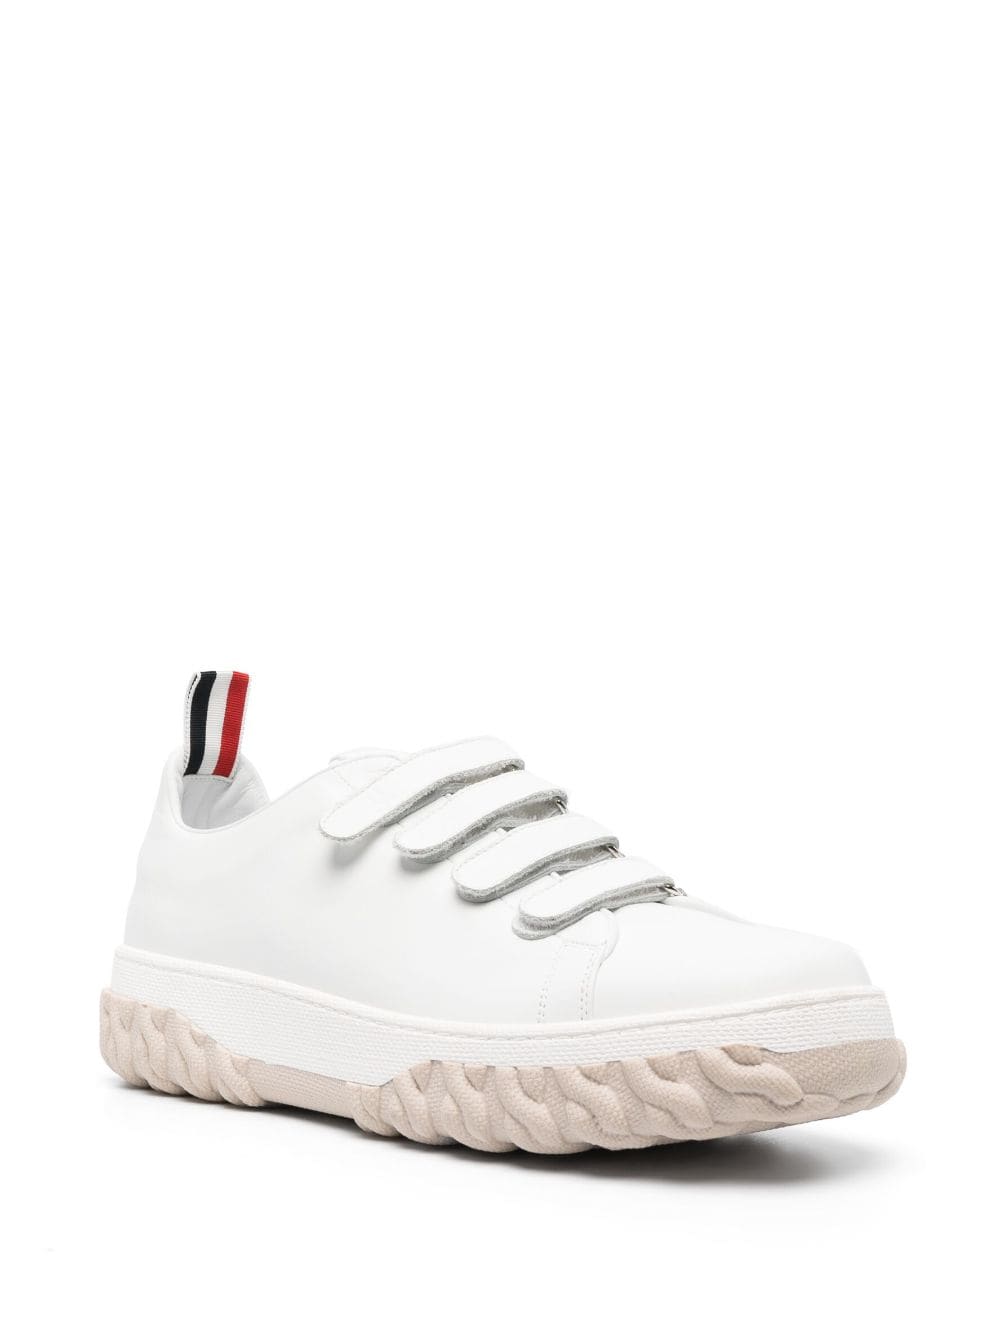 Court Shoe W/ 4Bar Velcro On Cable Knit Sole In Vitello Calf Leather White